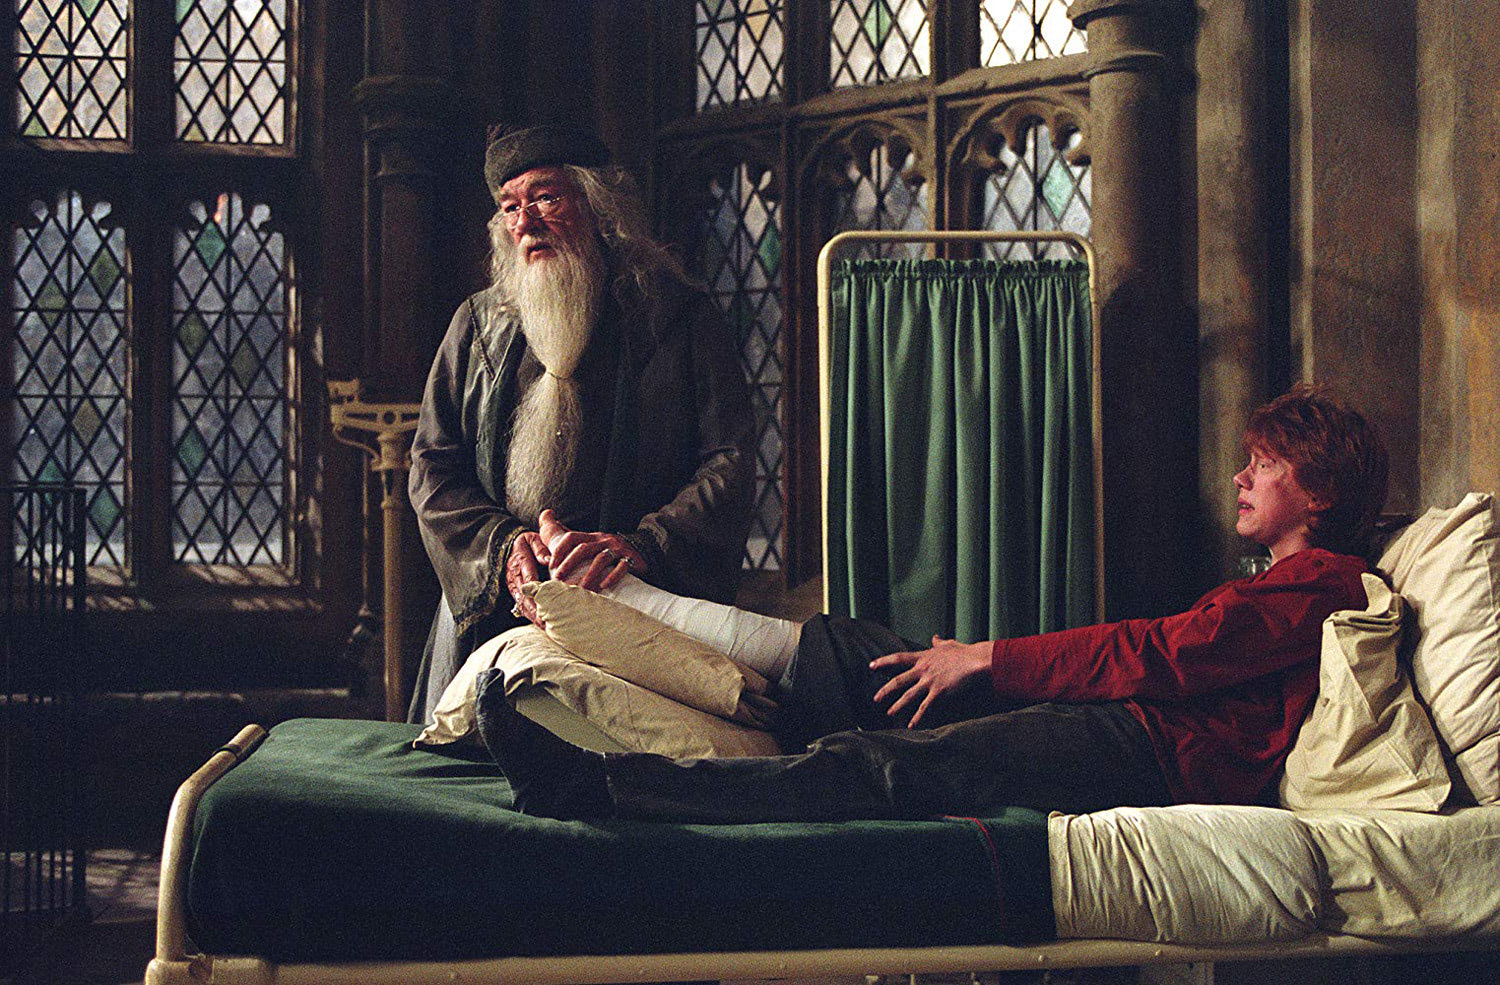 Ron and Dumbledore in the Hospital Wing